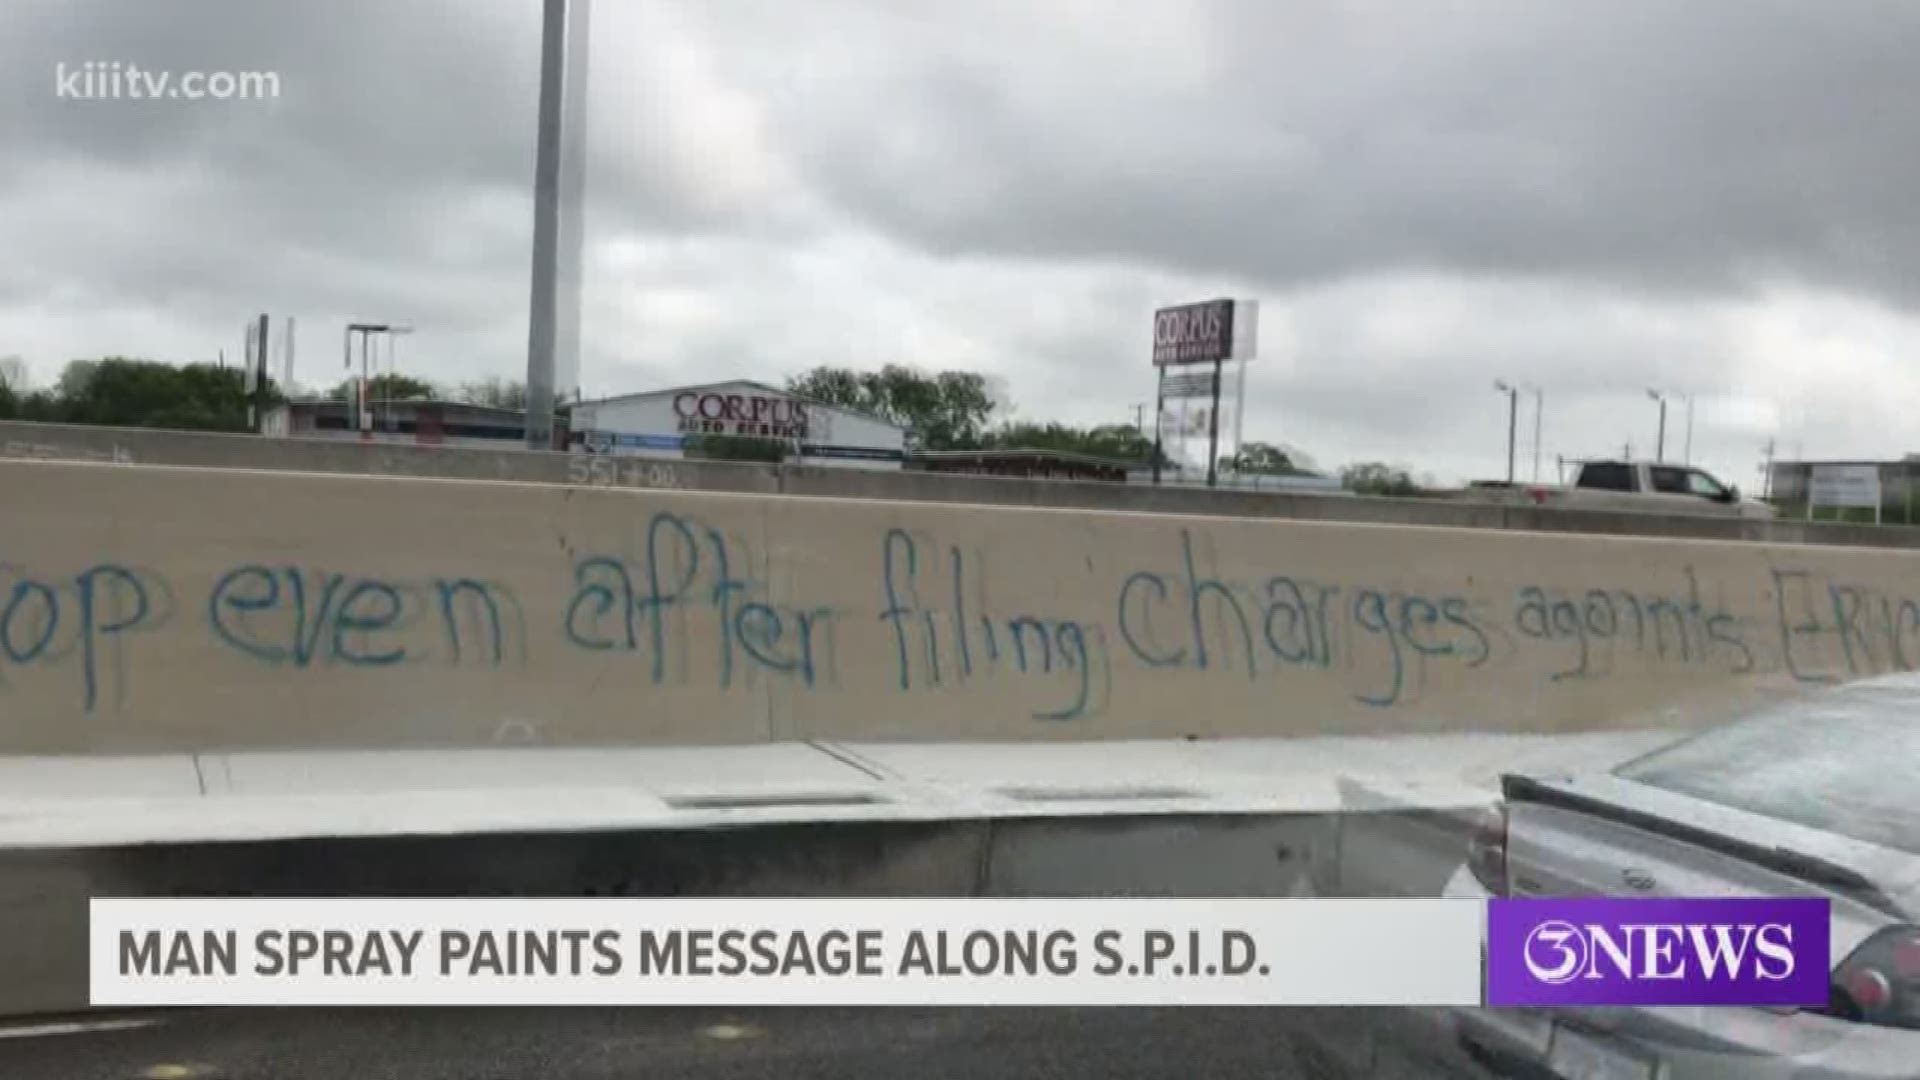 Police arrested a man Tuesday morning after he spray painted a message on a concrete barrier along eastbound SPID near the Corpus Christi Trade Center.